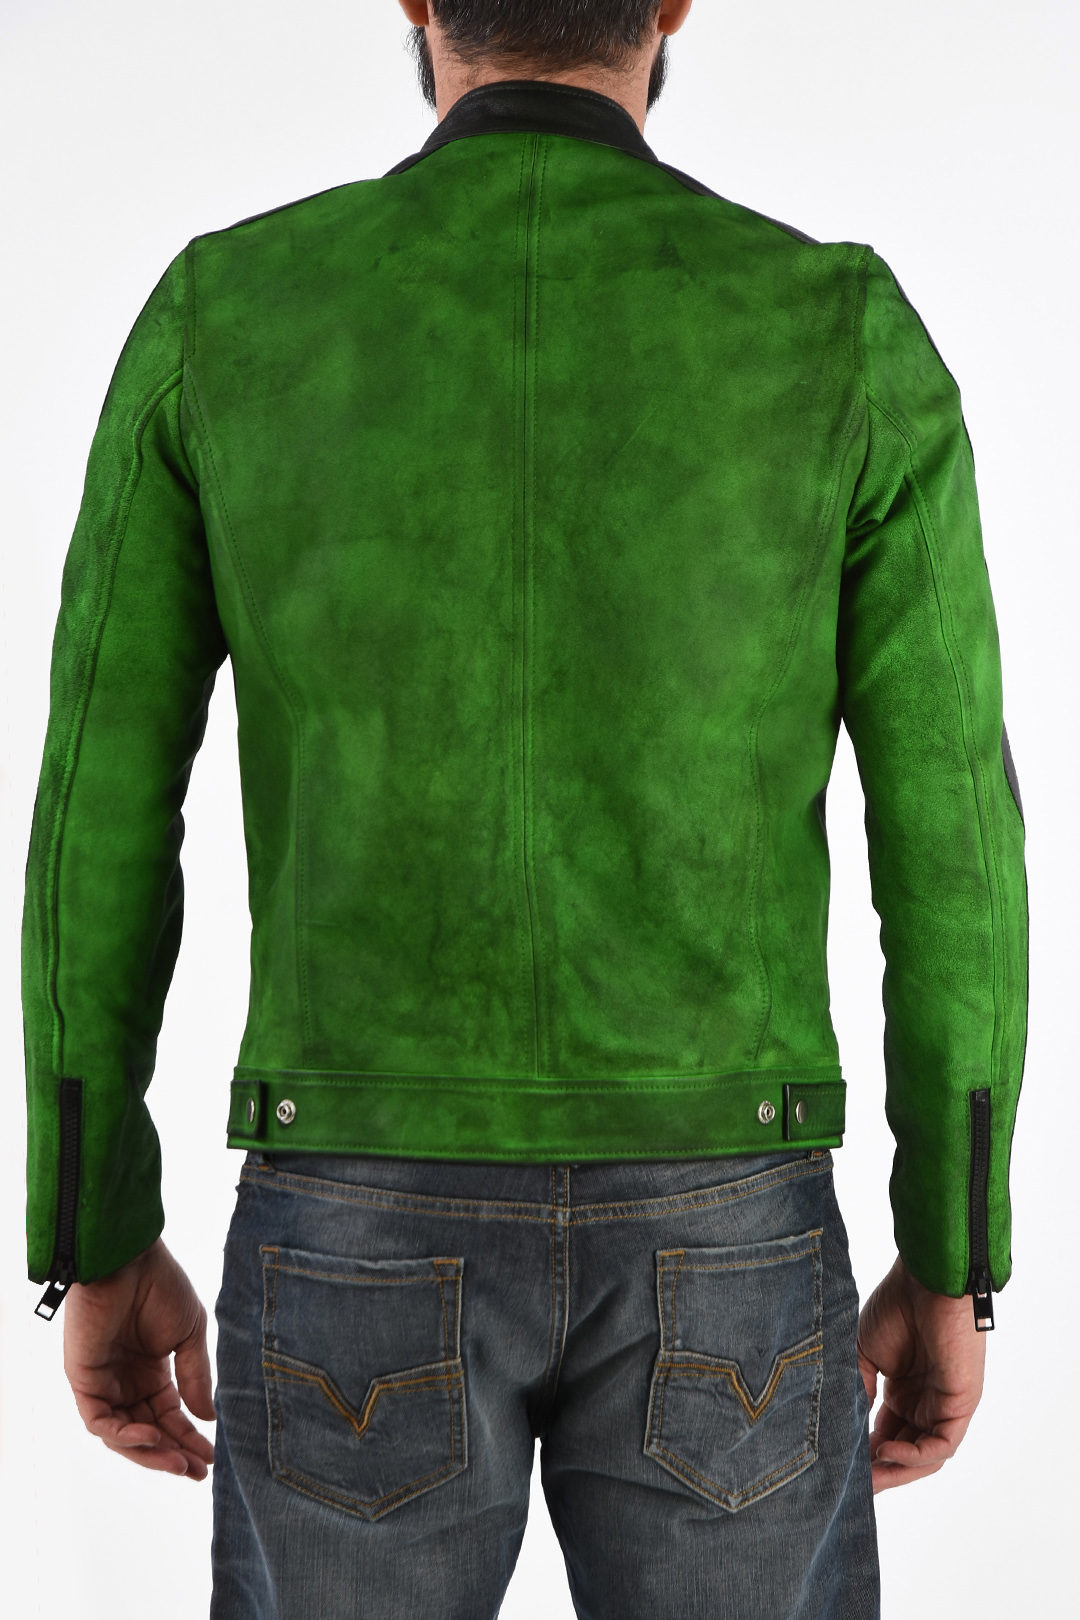 Diesel Leather L-BOY-A Jacket with Zip Closure men - Glamood Outlet